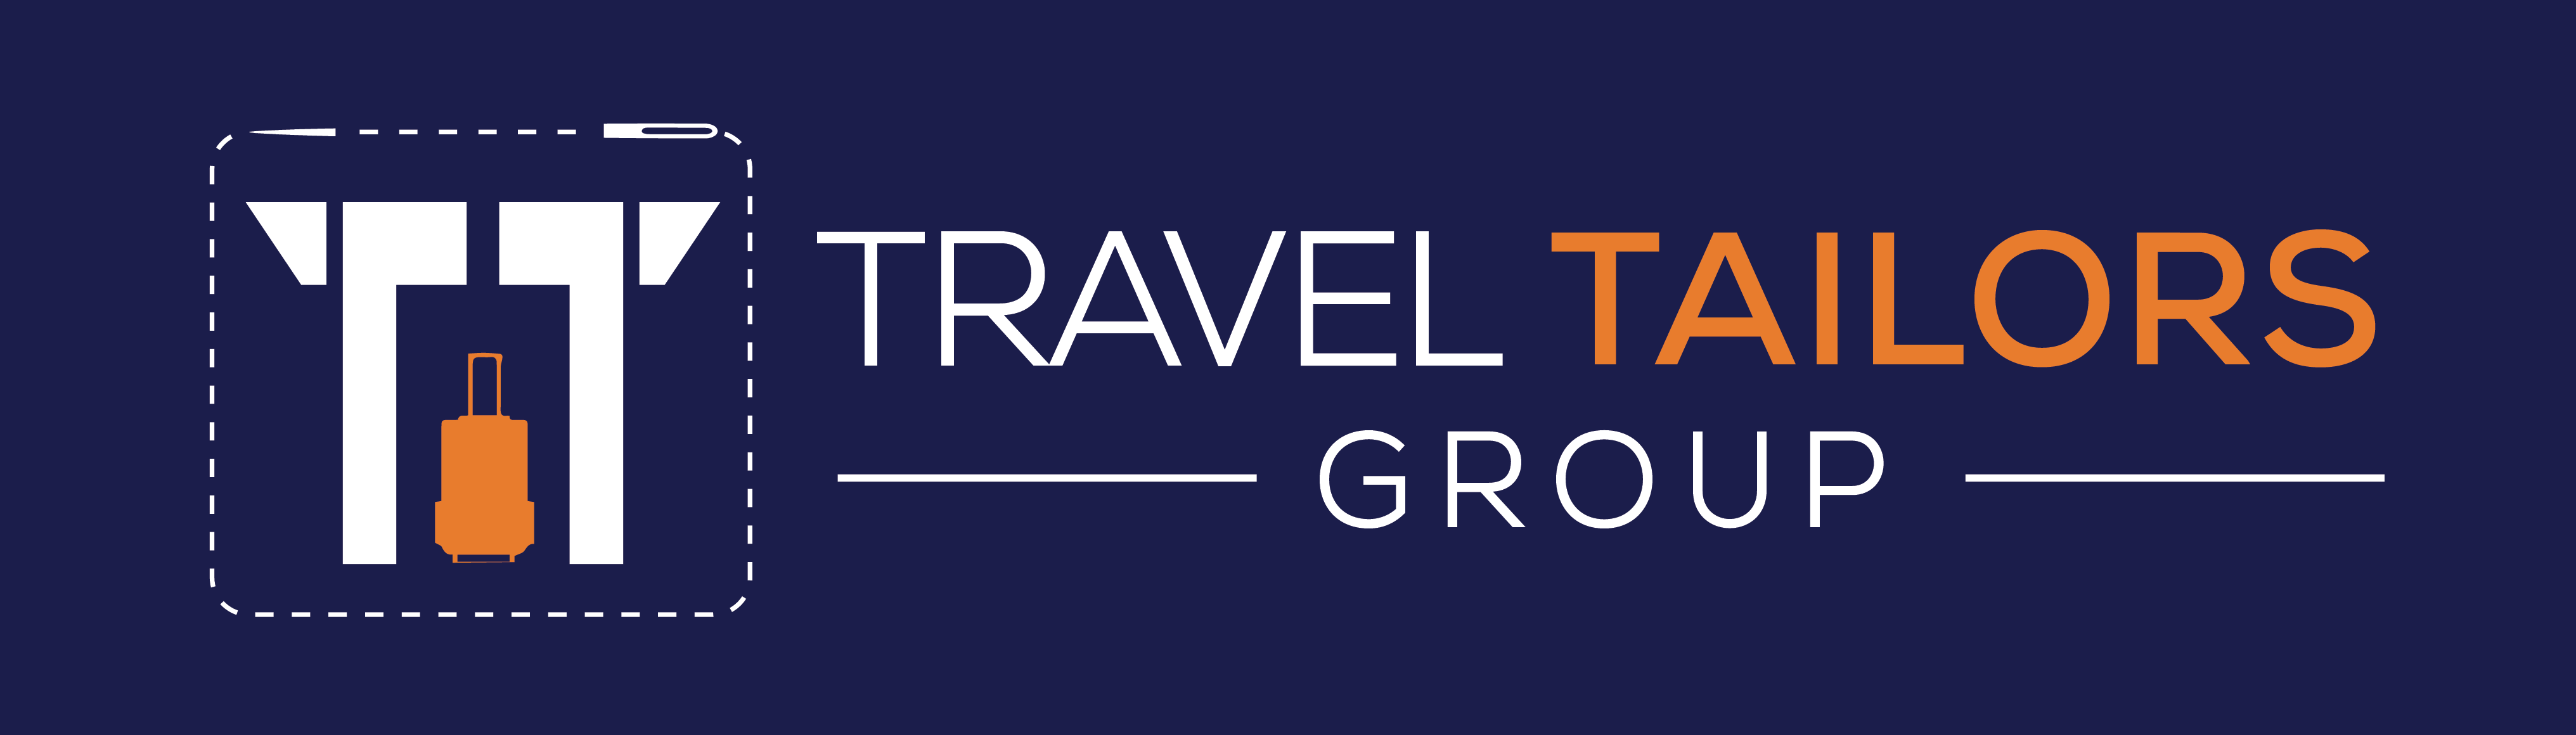 Travel Tailors Group